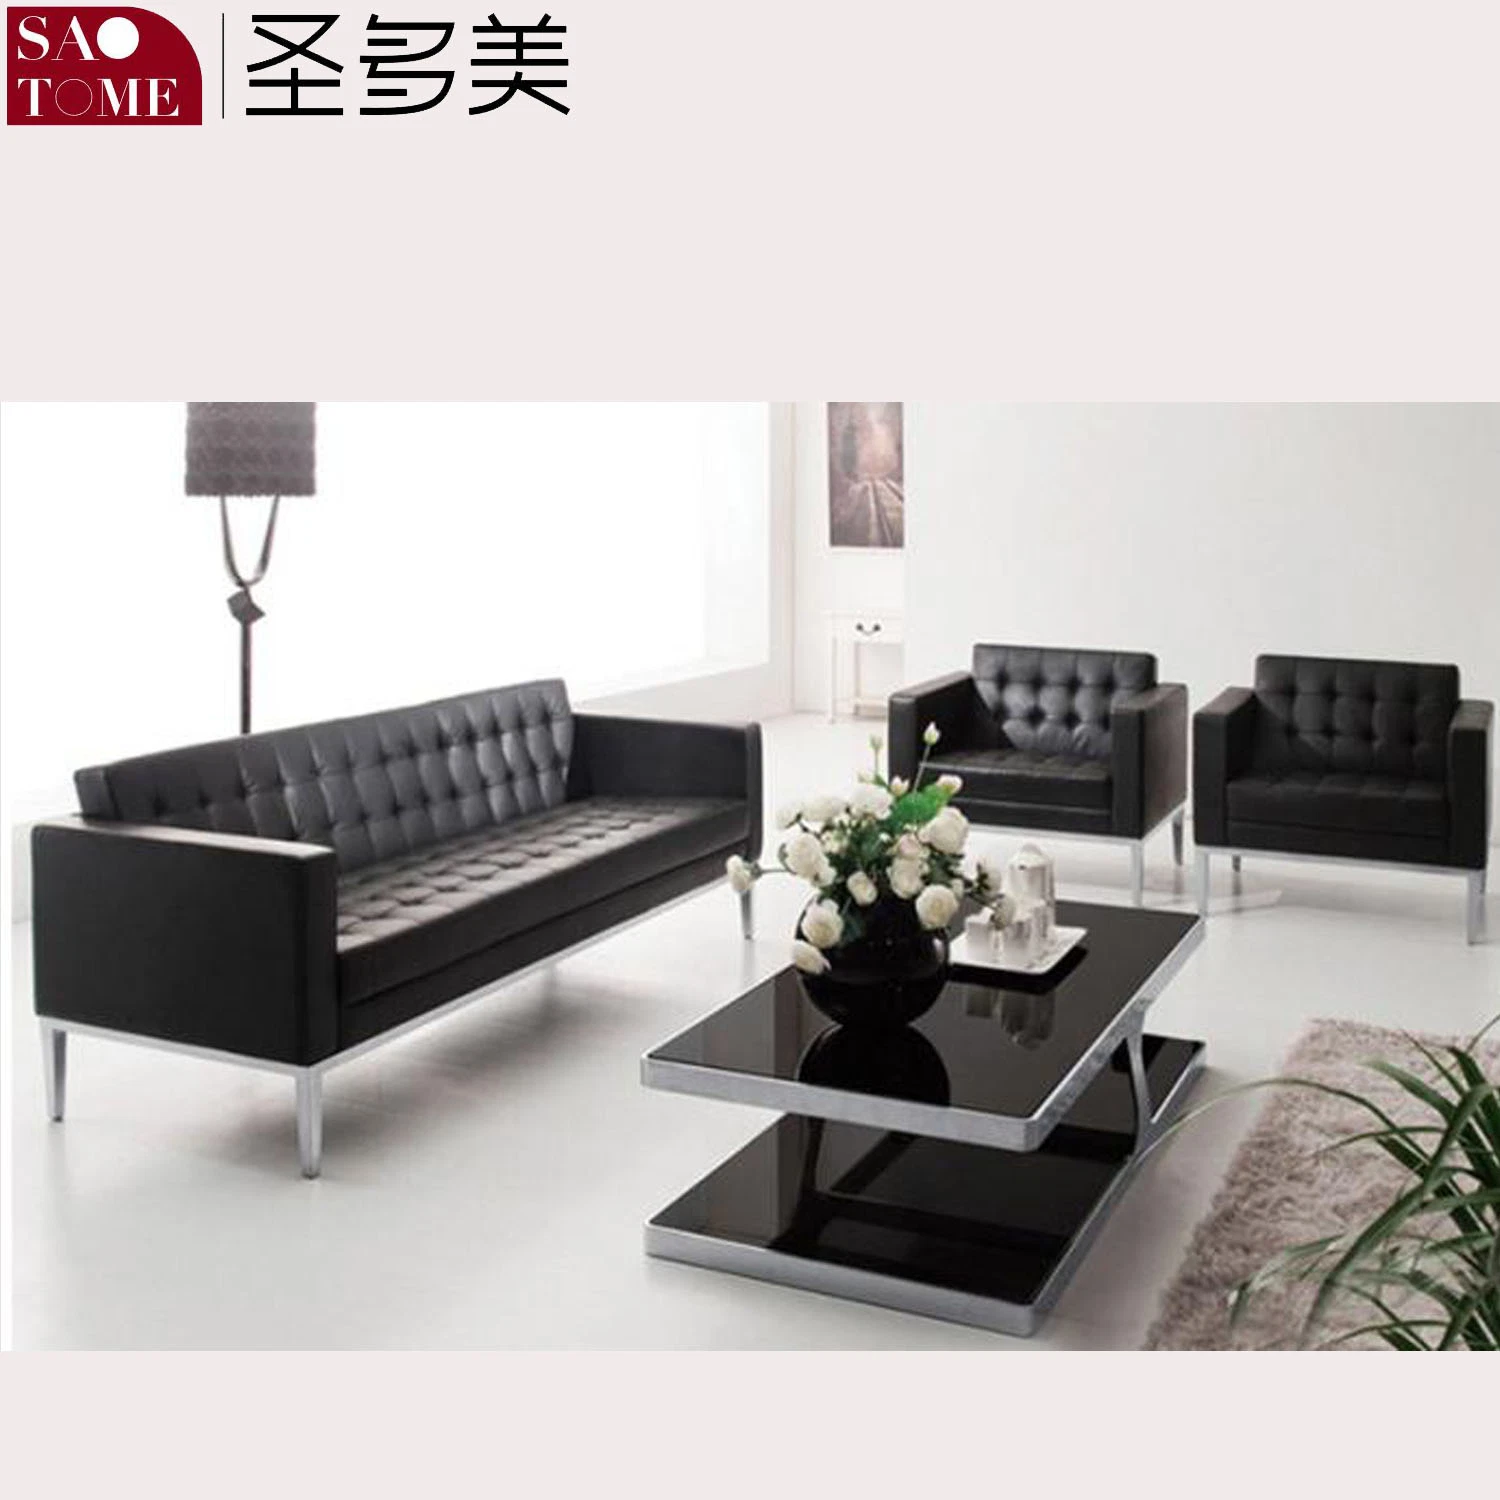 Luxury Style Leather 1 Seater 3 Seater Couch Leisure Living Room Home Furniture Modern Sofa